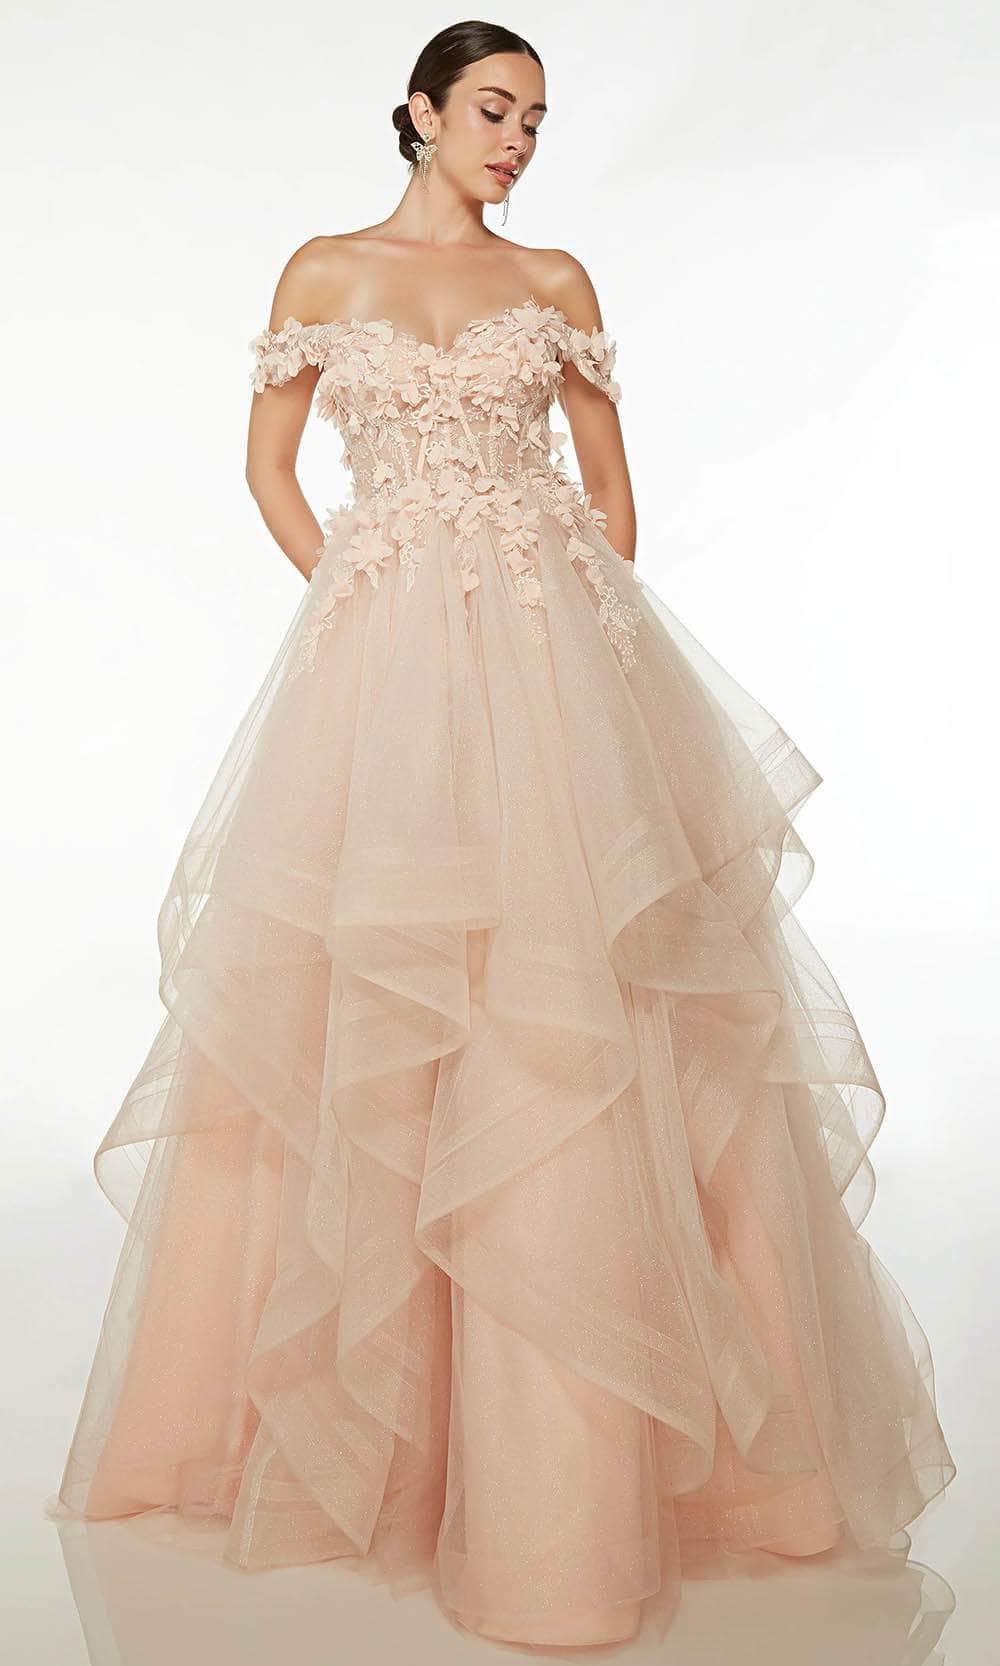 Alyce Paris 61532 - Sweetheart Ruffled Tulle Prom Gown
